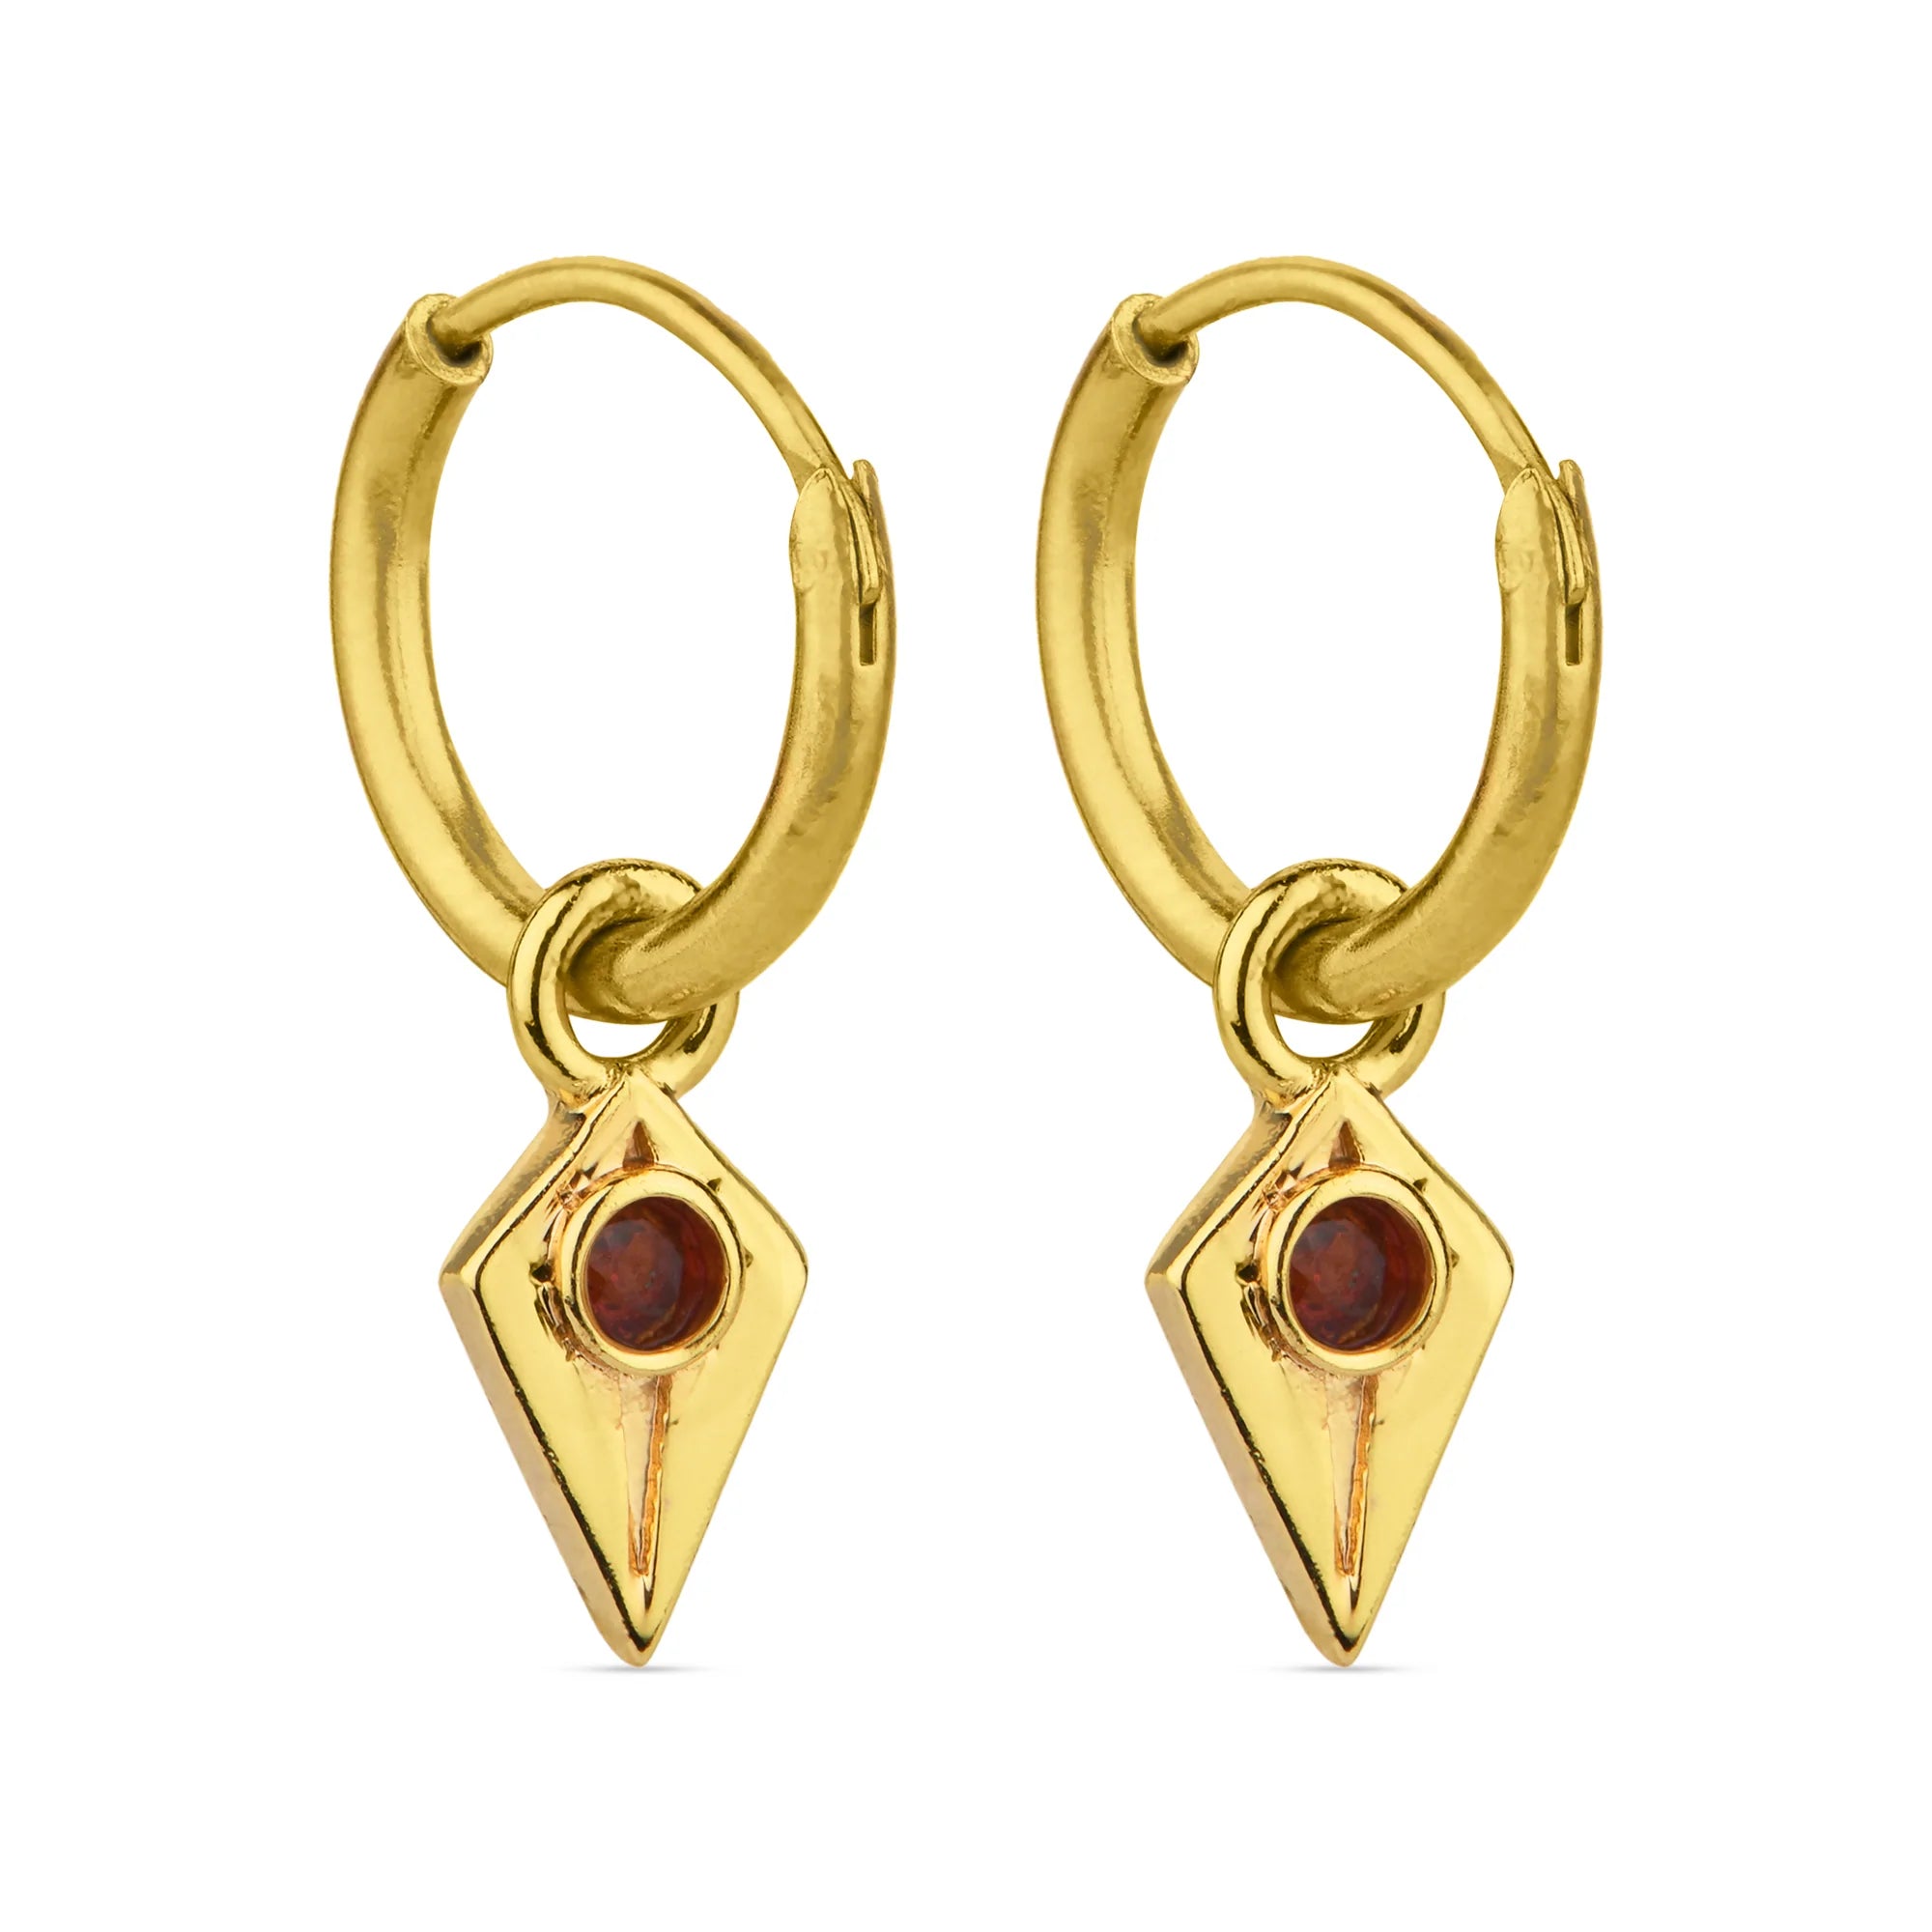 Real Gold Plated Z Red Birthstone Triangle Hoops Earring For Women By Accessorize London